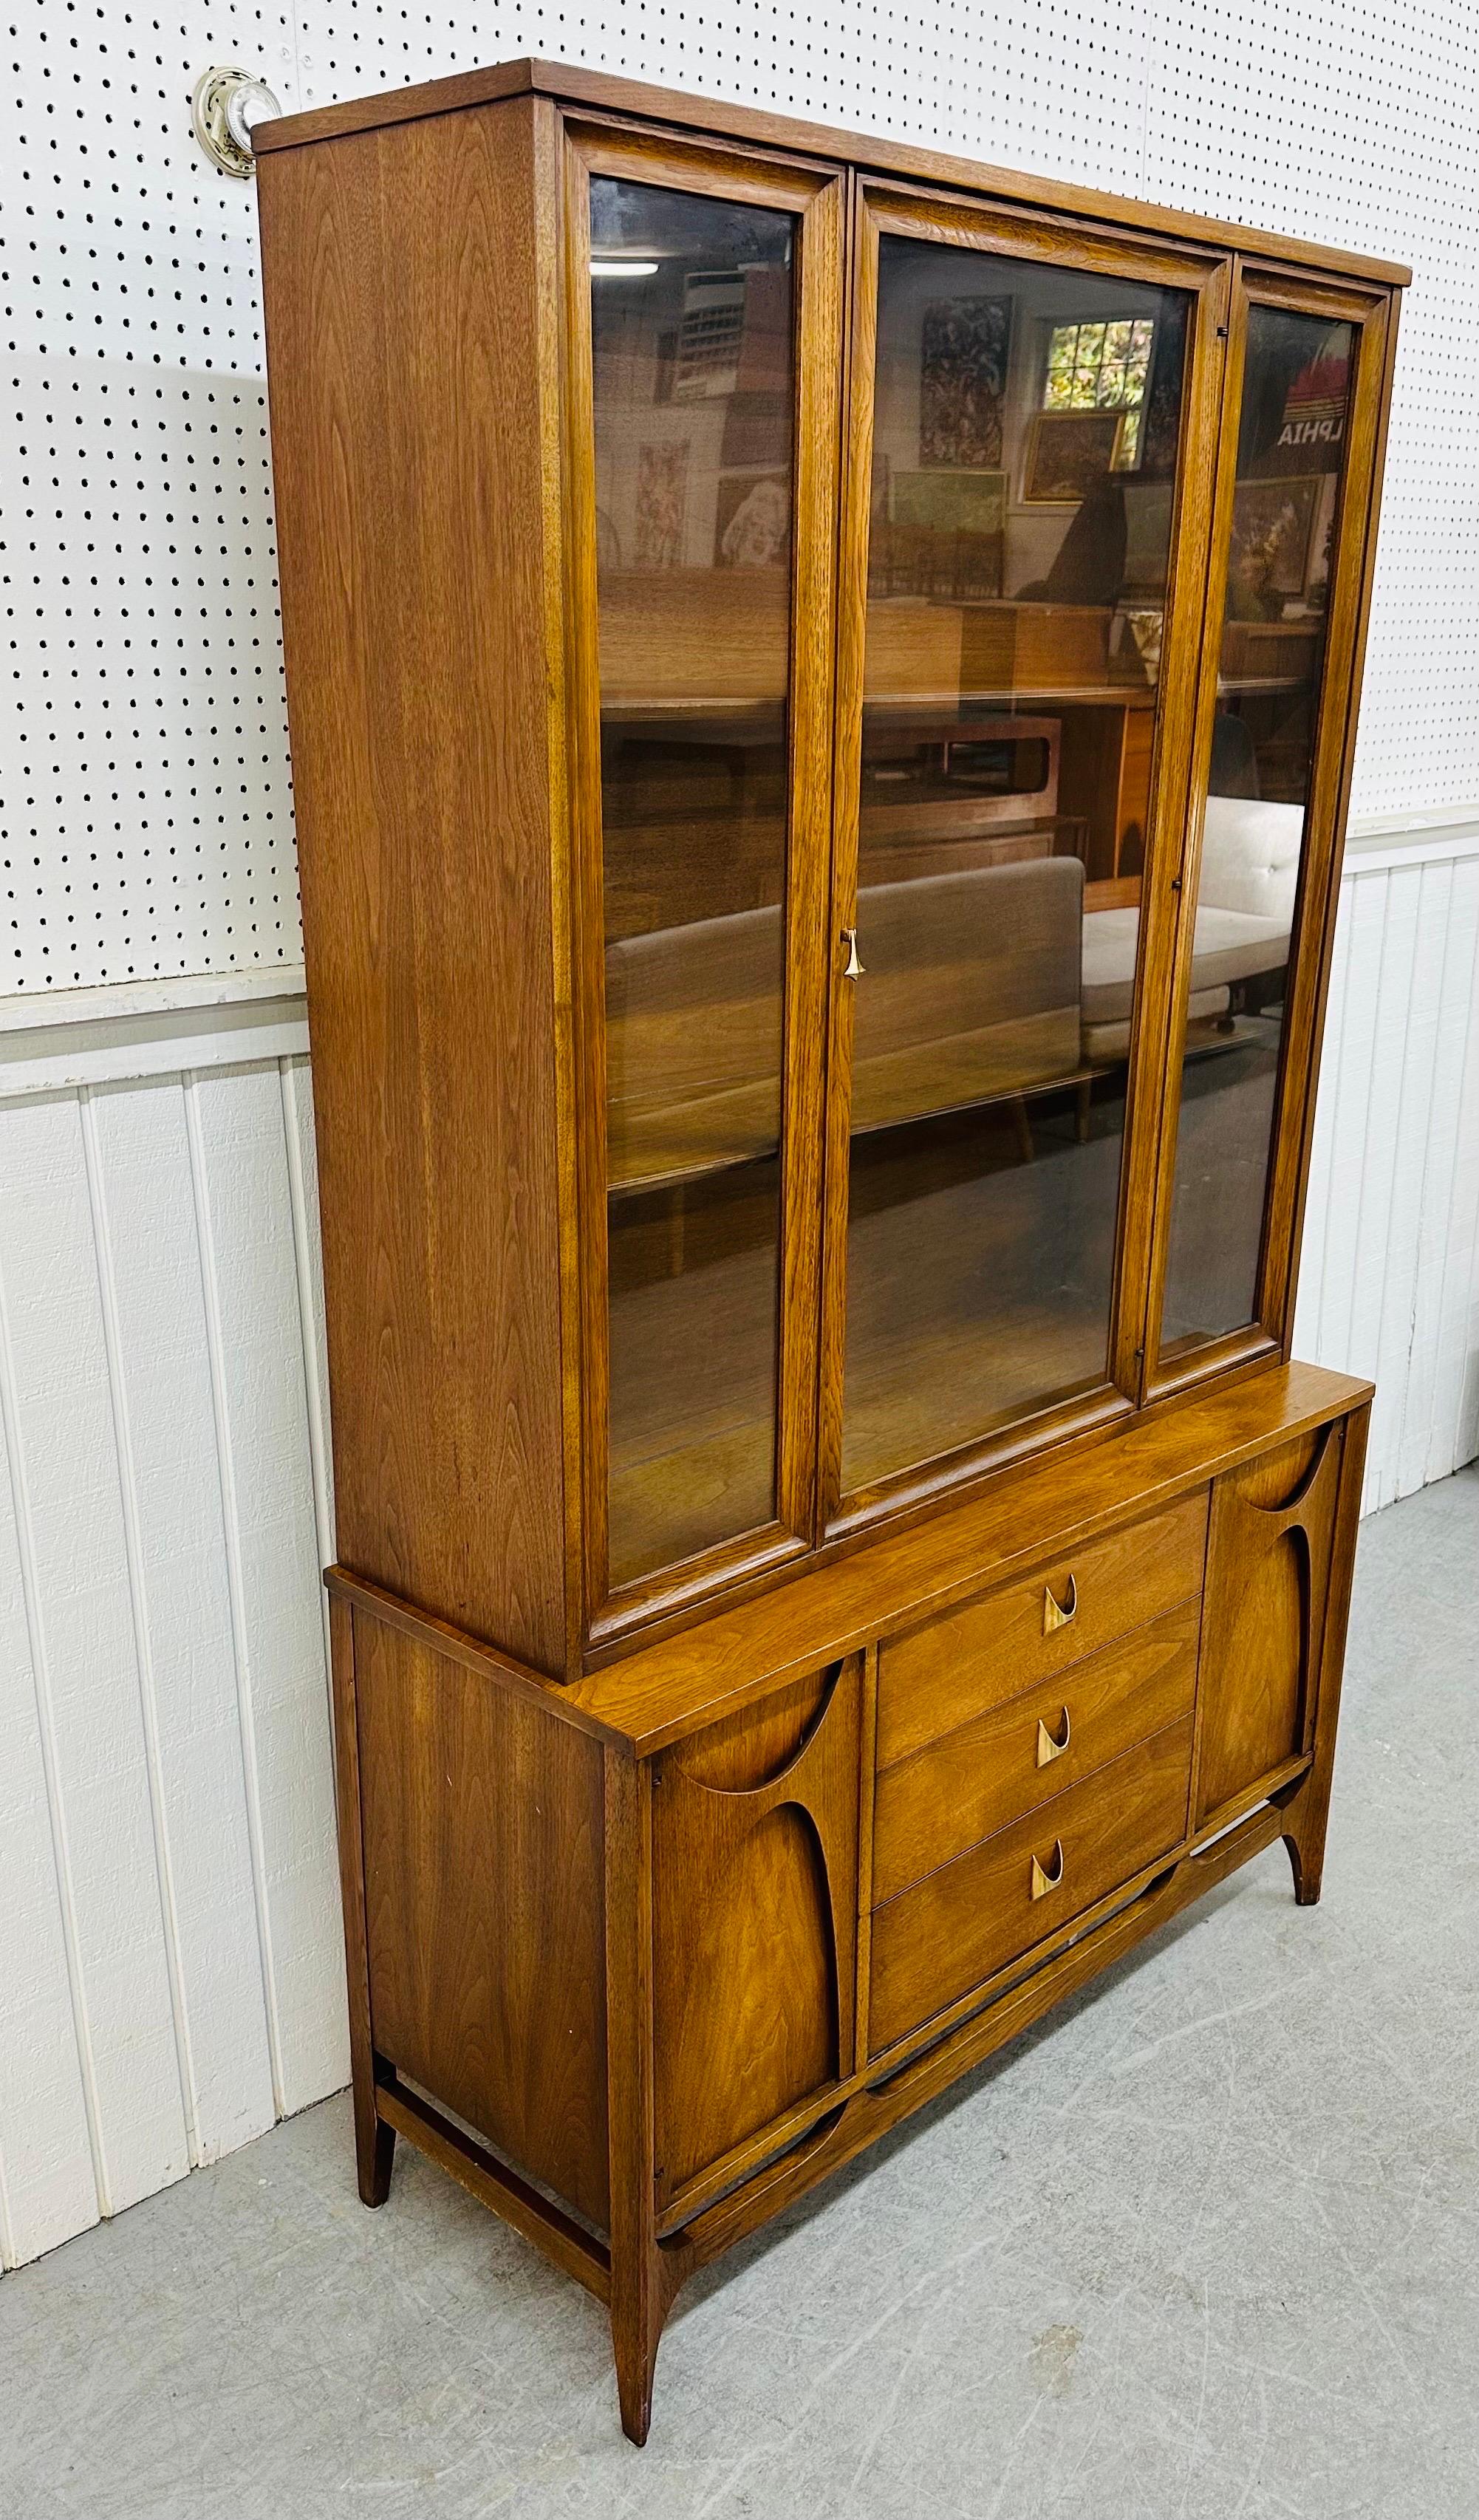 This listing is for a Mid-Century Modern Broyhill Brasilia Walnut China Cabinet. Featuring a straight line design, removable glass top, single door that opens up to storage space, a base that has two doors with the iconic sculpted Brasilia design,